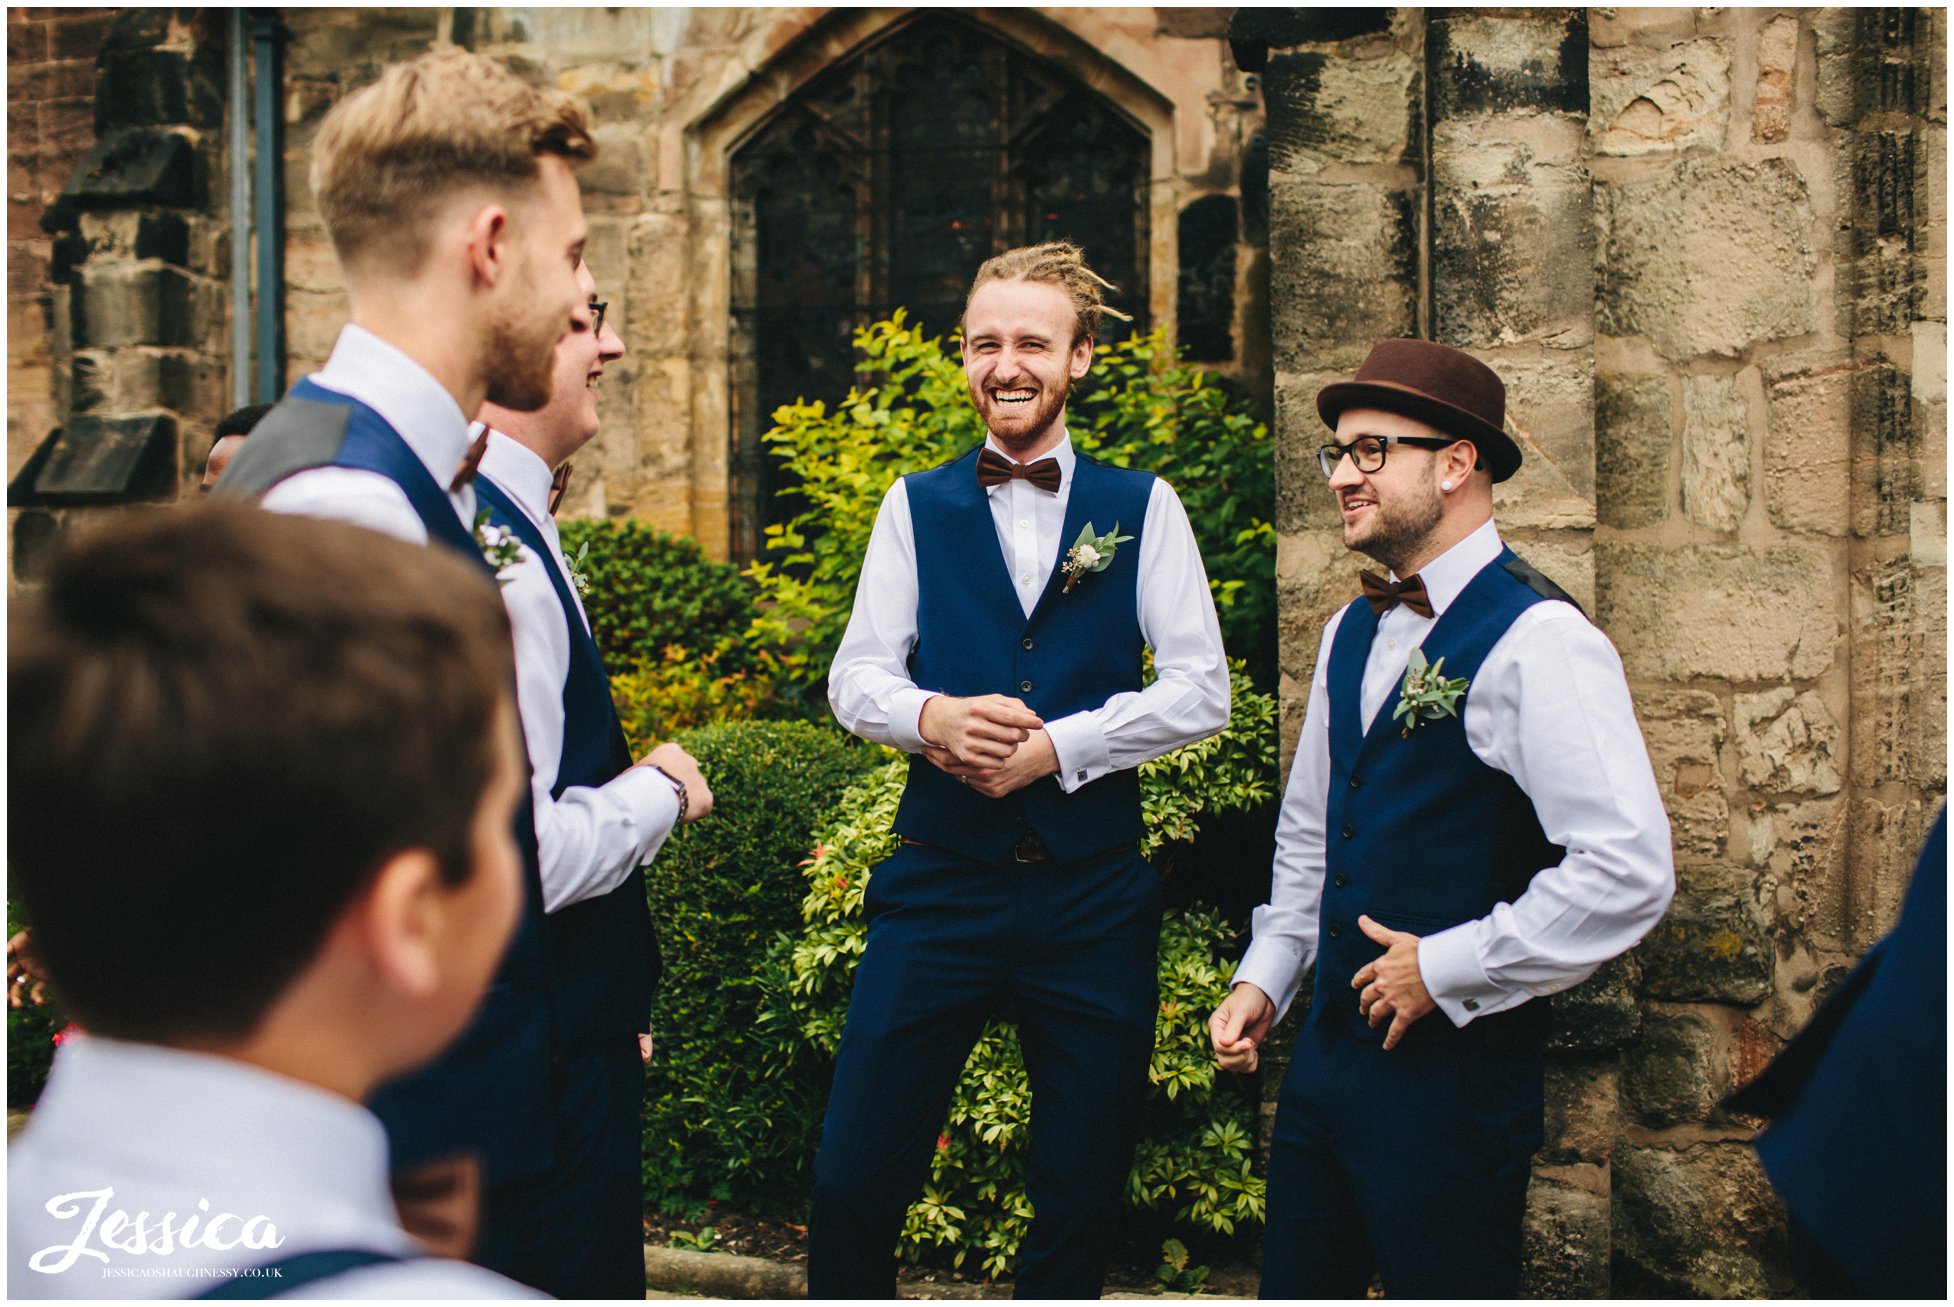 groomsmen celebrate the marriage after the service